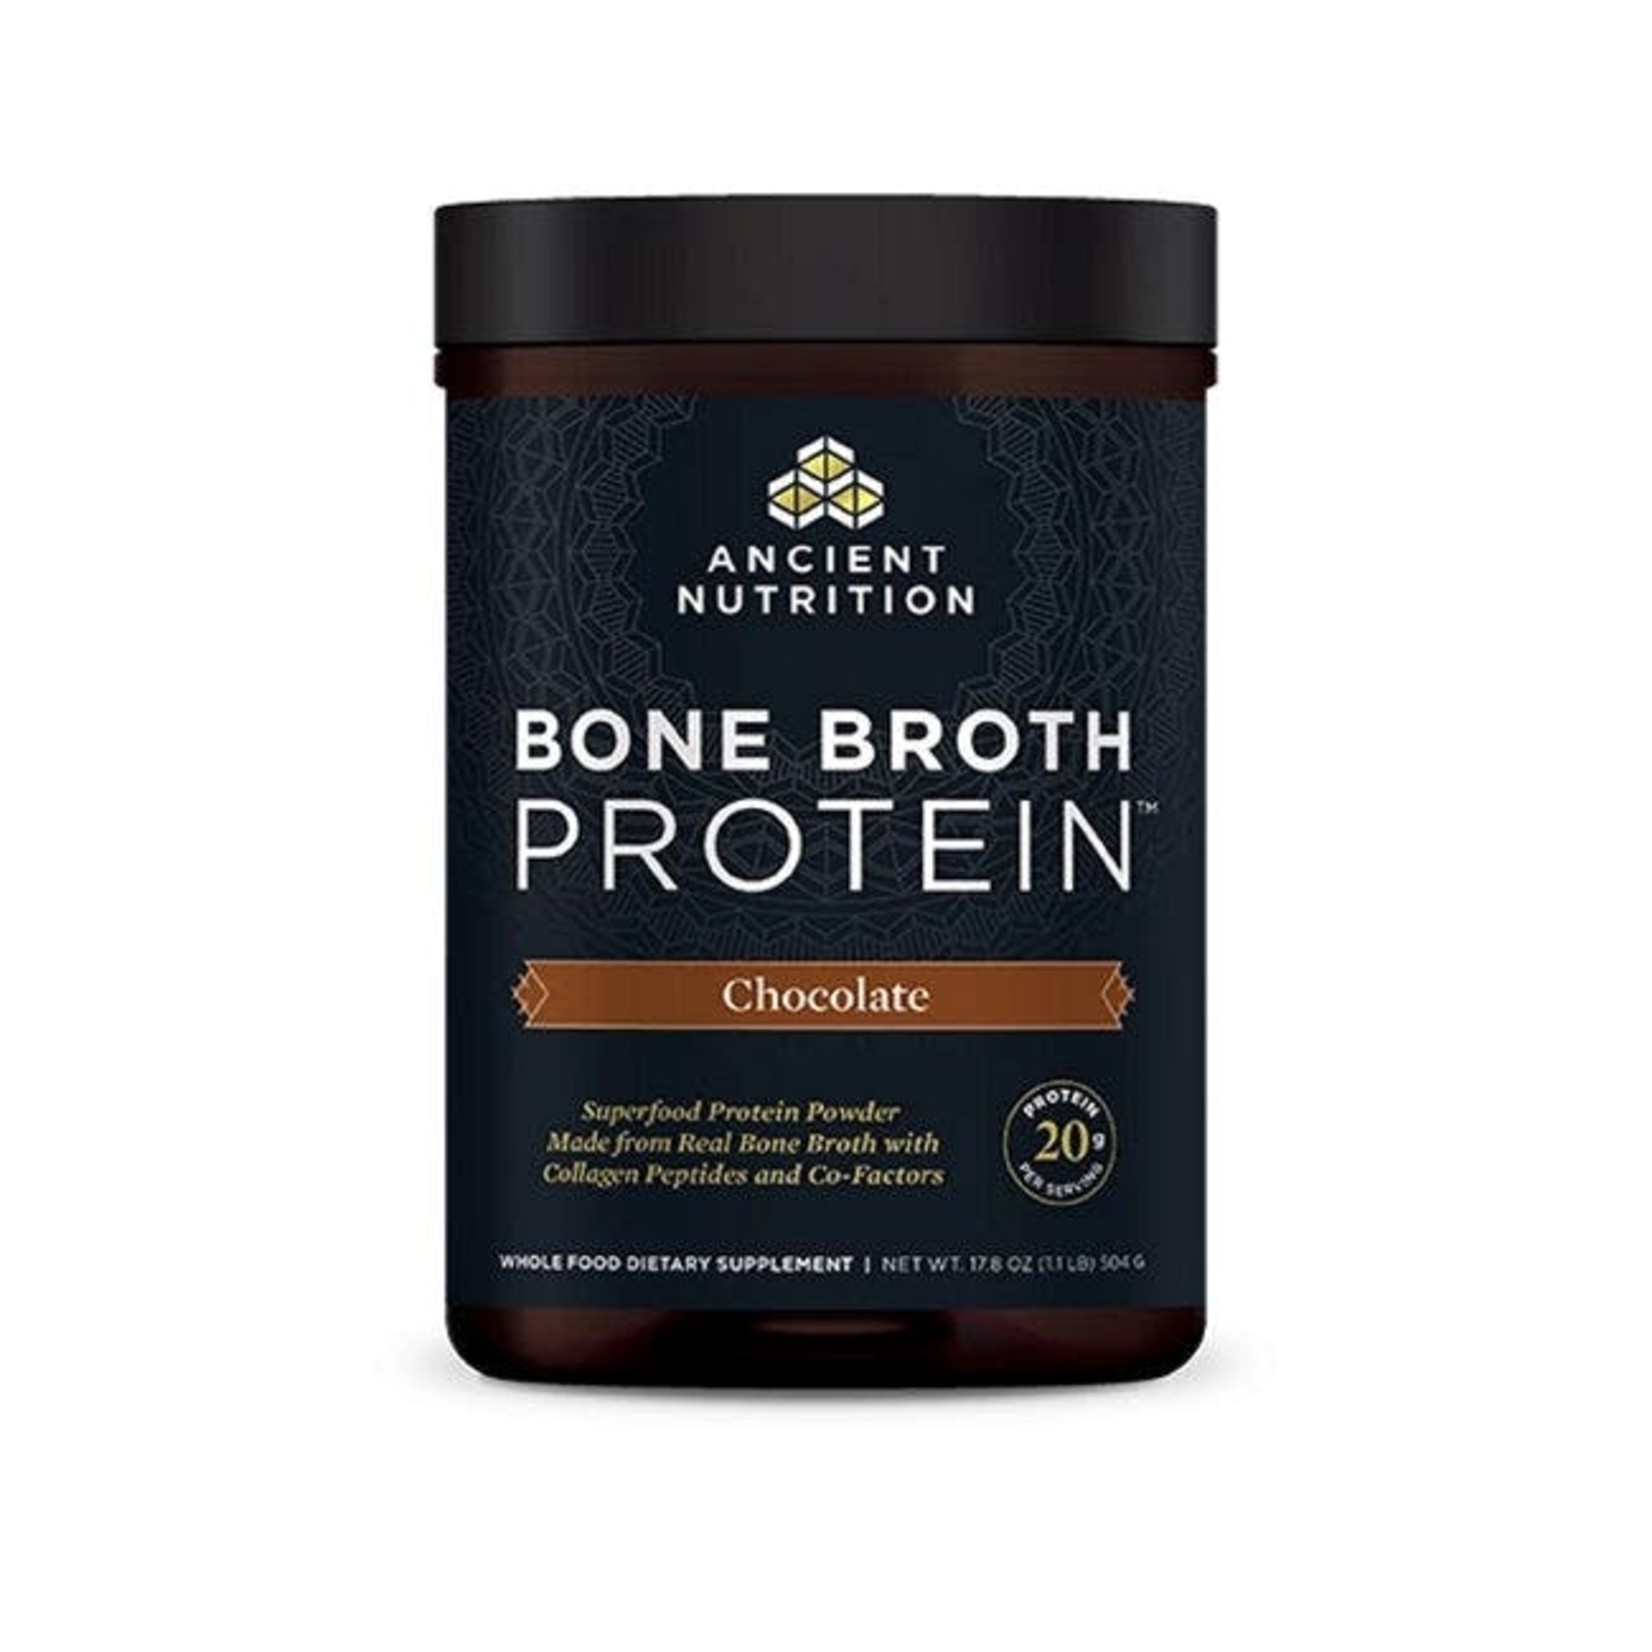 Ancient Nutrition Ancient Nutrition - Bone Broth Protein Chocolate - 17.8 oz